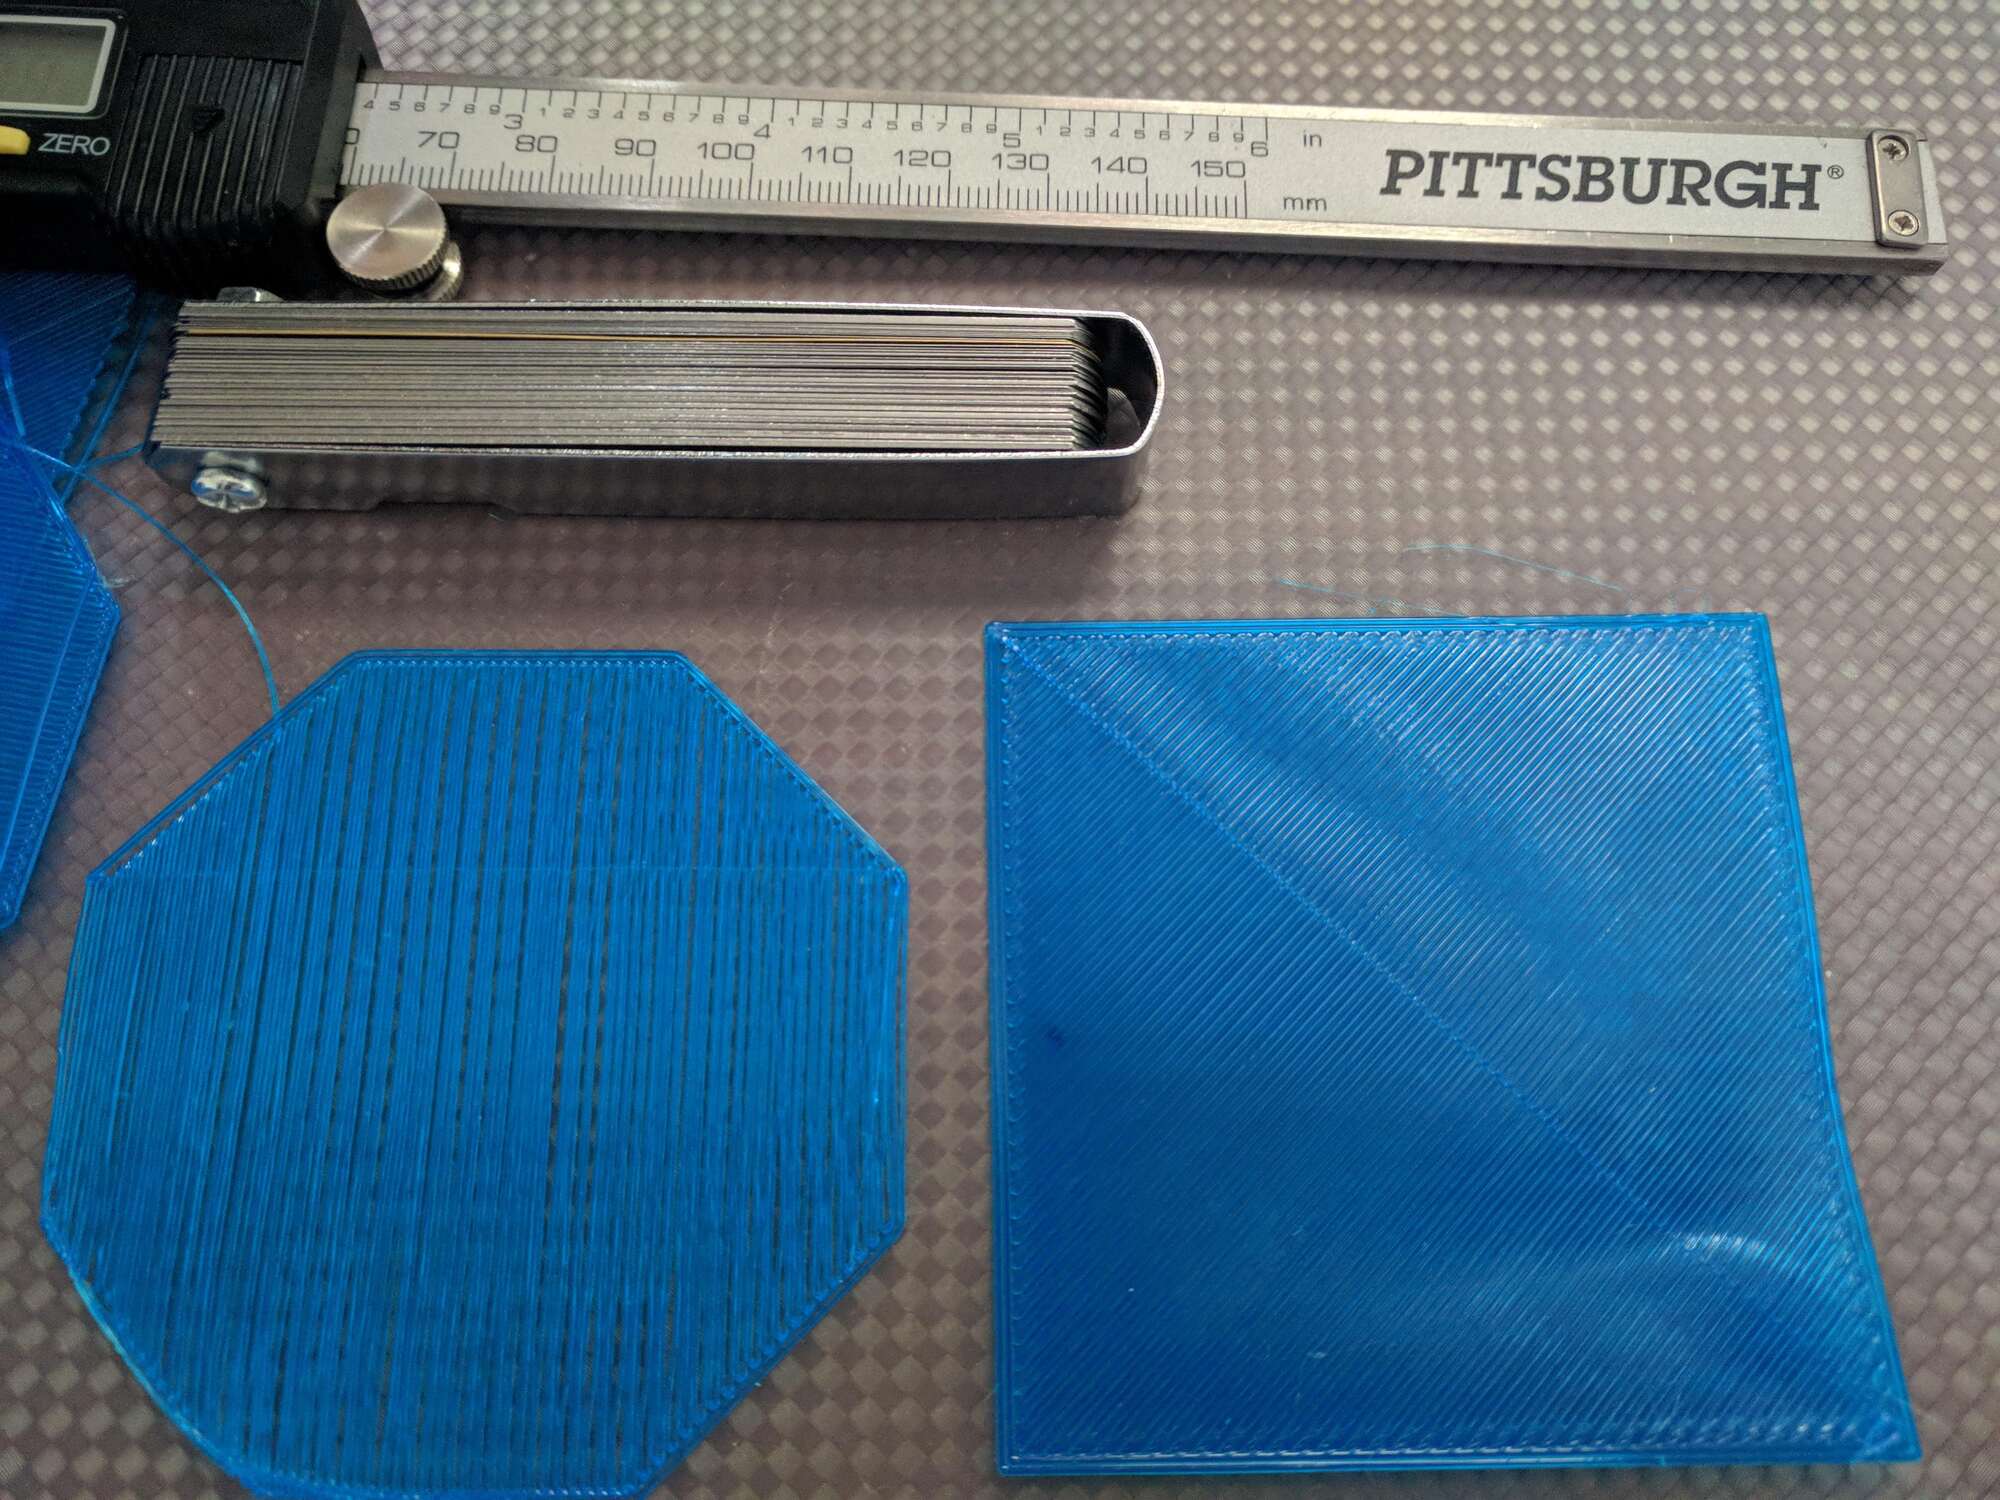 How To Use Feeler Gauge With A 3D Printer